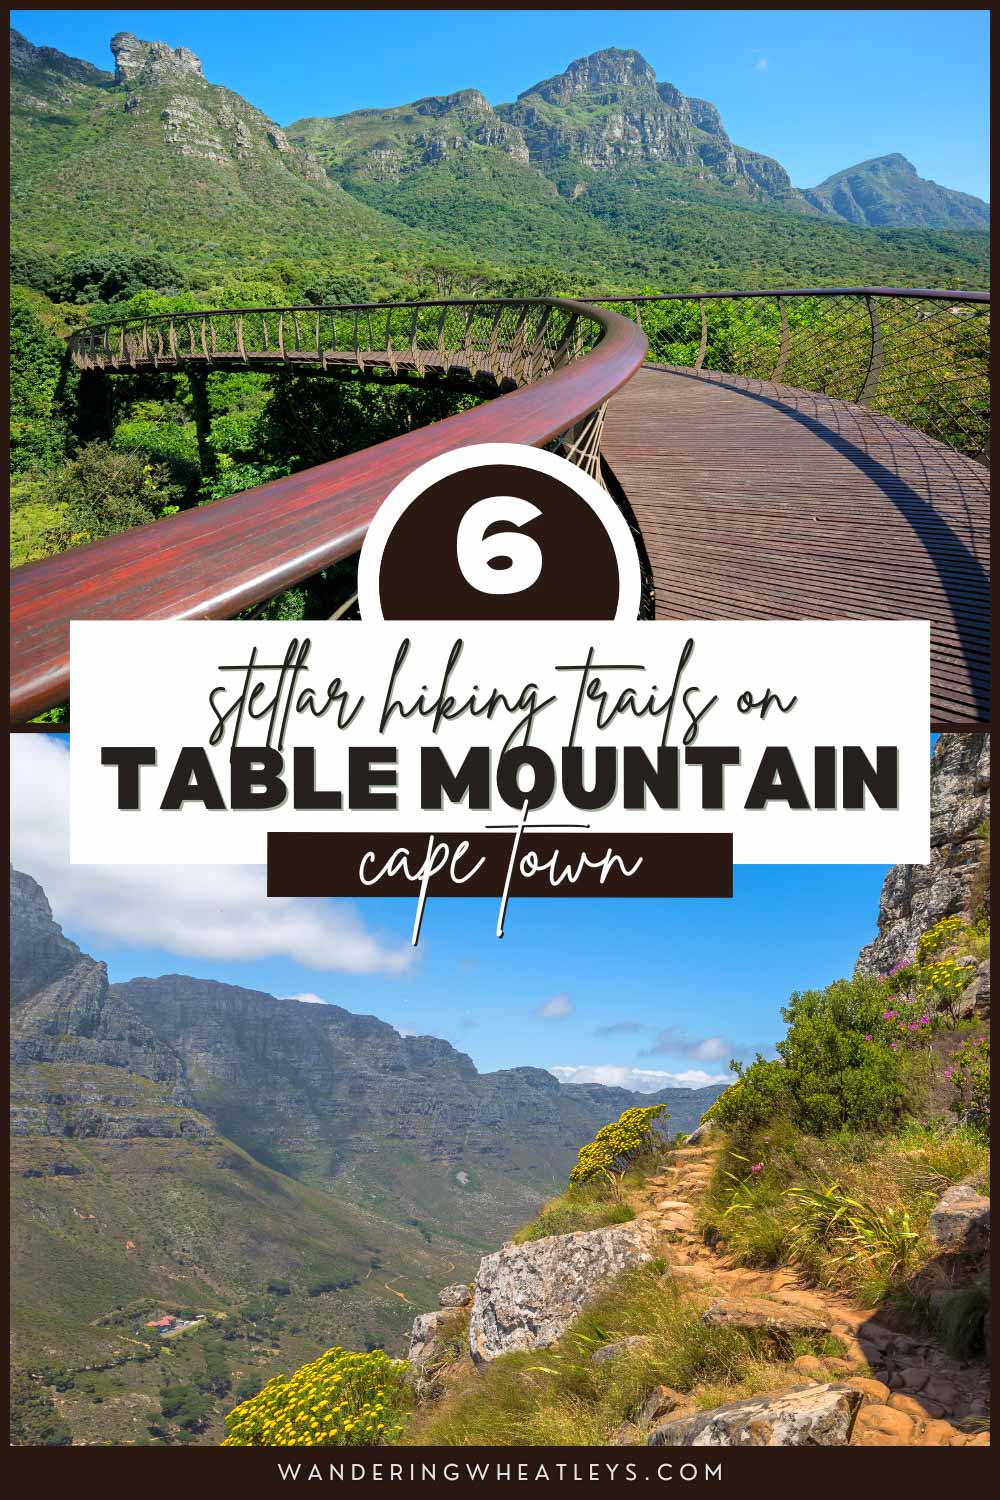 Best Hikes on Table Mountain in Cape Town